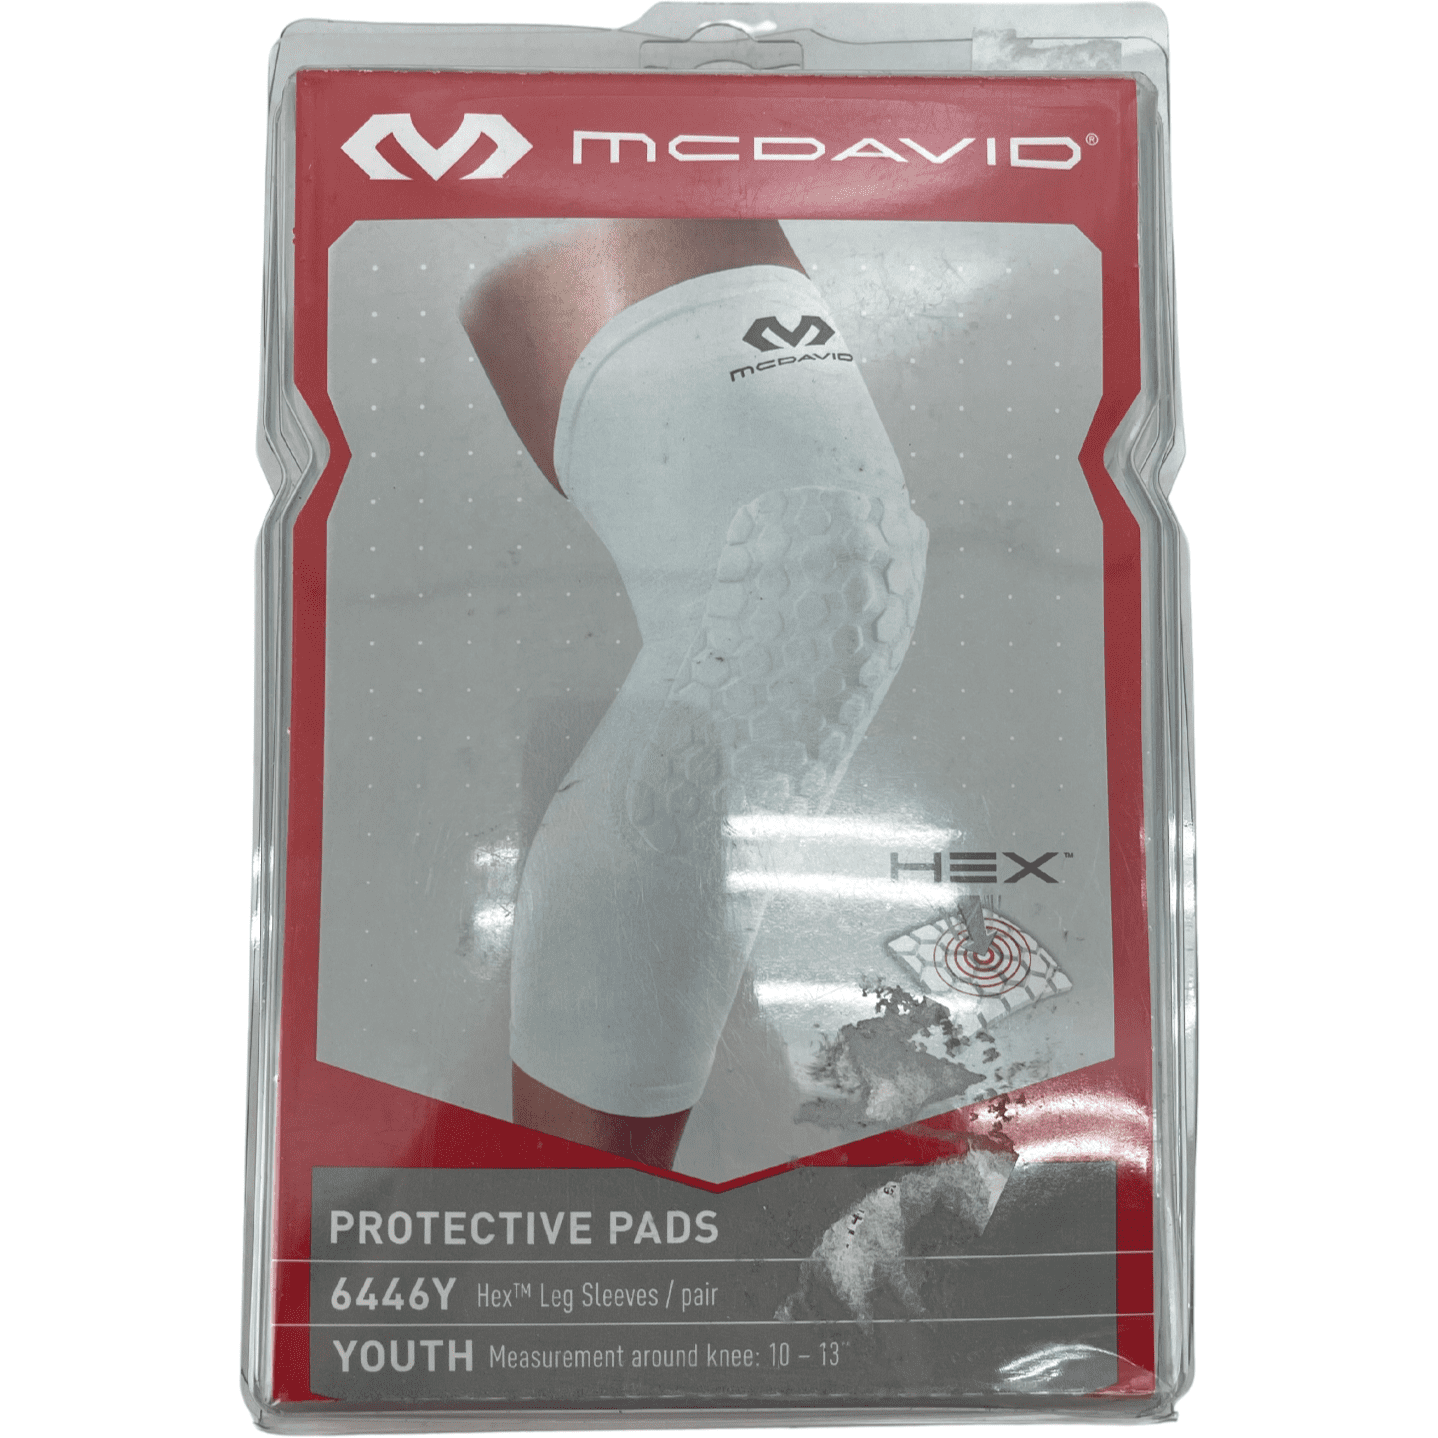 McDavid Protective Pads / 6446Y Hex Leg Sleeve / White / Size Youth